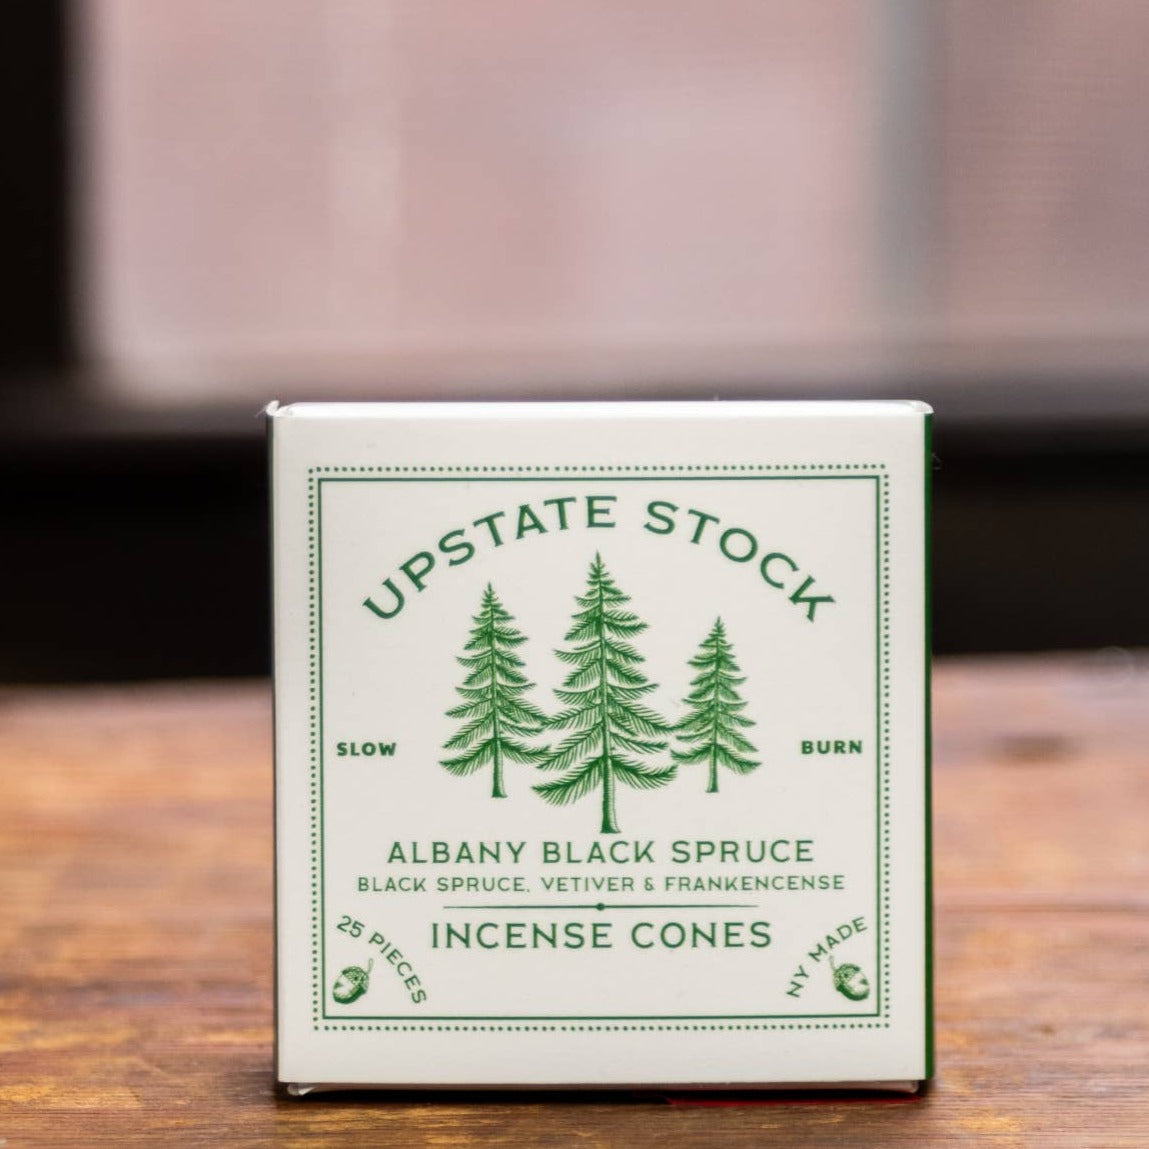 Albany Black Spruce - 25 Pack Incense Cones